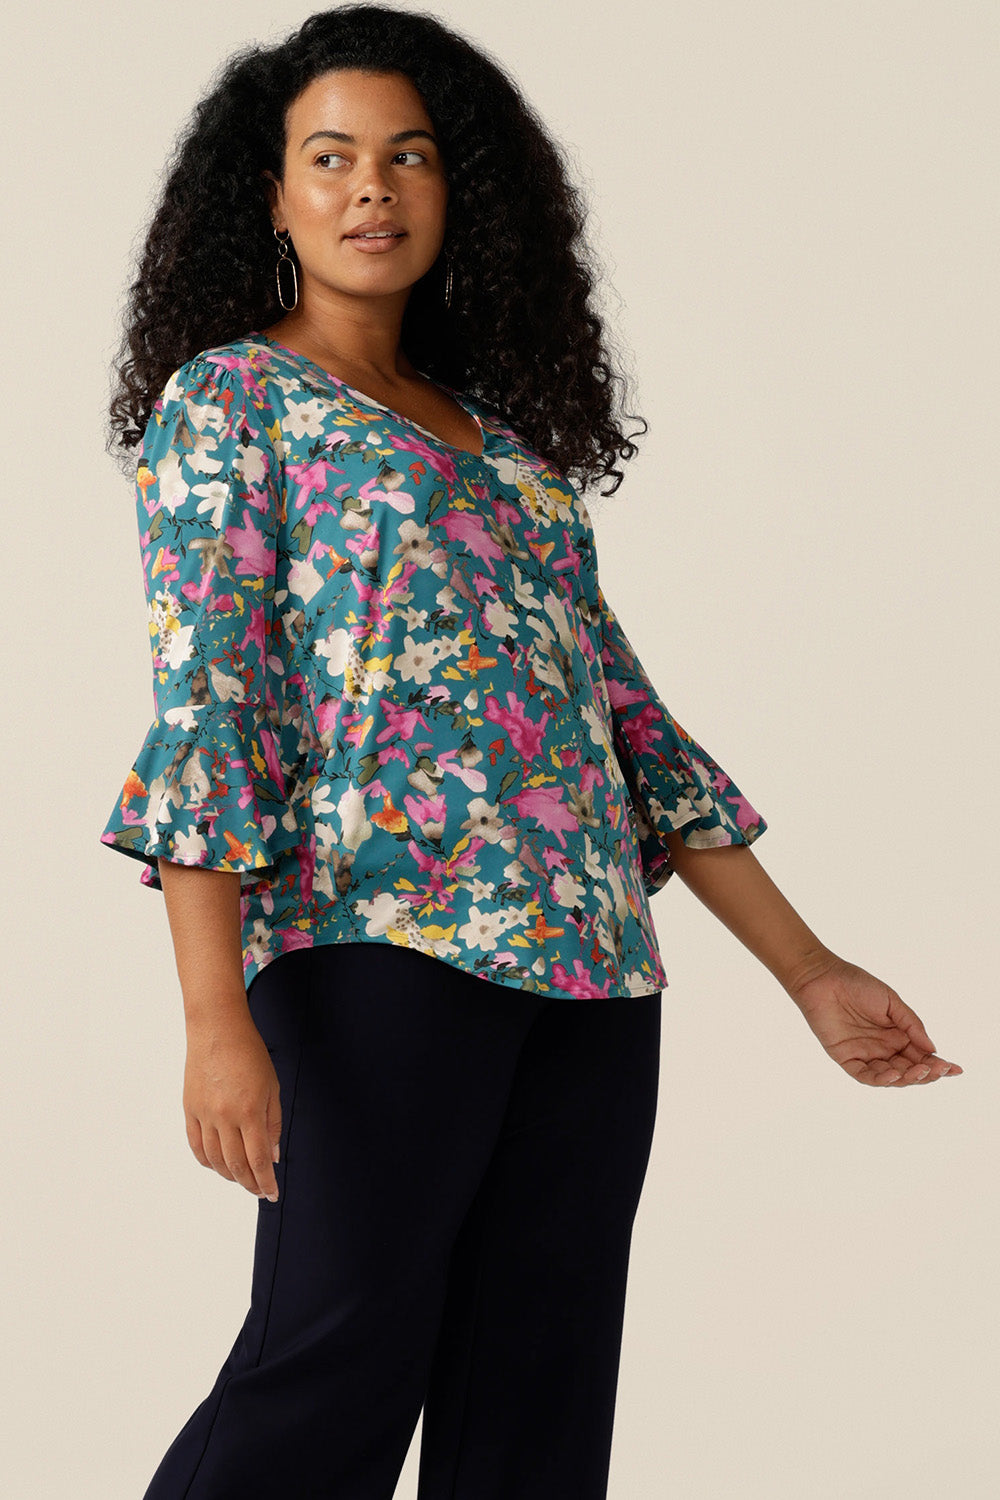 a size 12 curvy woman wearing a semi-fitted jersey top. The top features 3/4 sleeves with fluted cuffs, a V-neck and  a floral print. The top was made in Australia in petite to plus sizes by women's clothing brand, Leina and Fleur